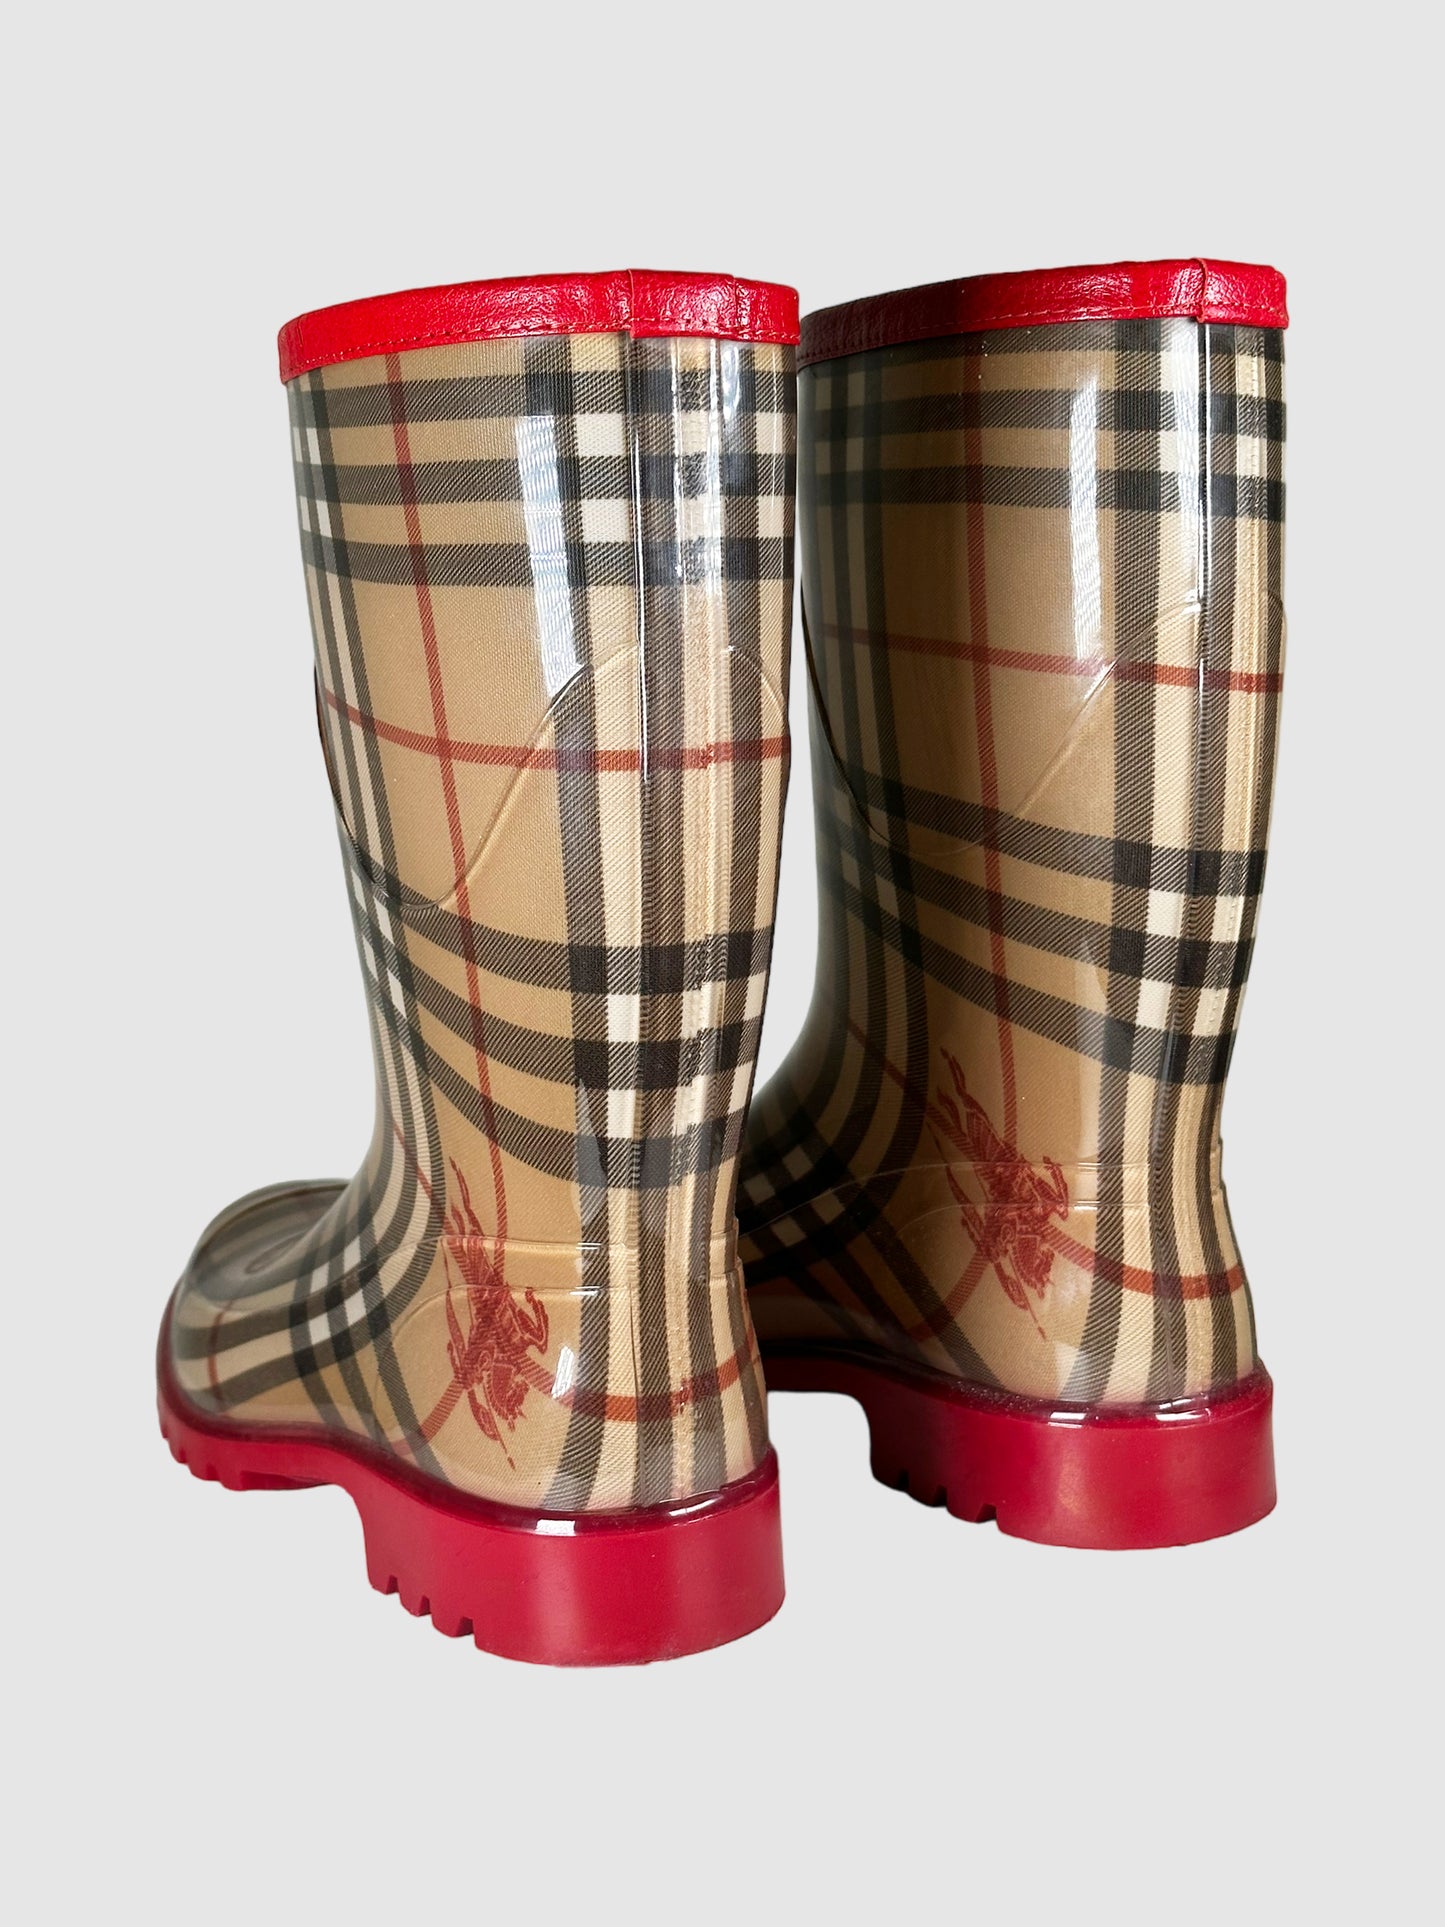 Burberry House Check Pattern Rubber Rain Boots - Size 40